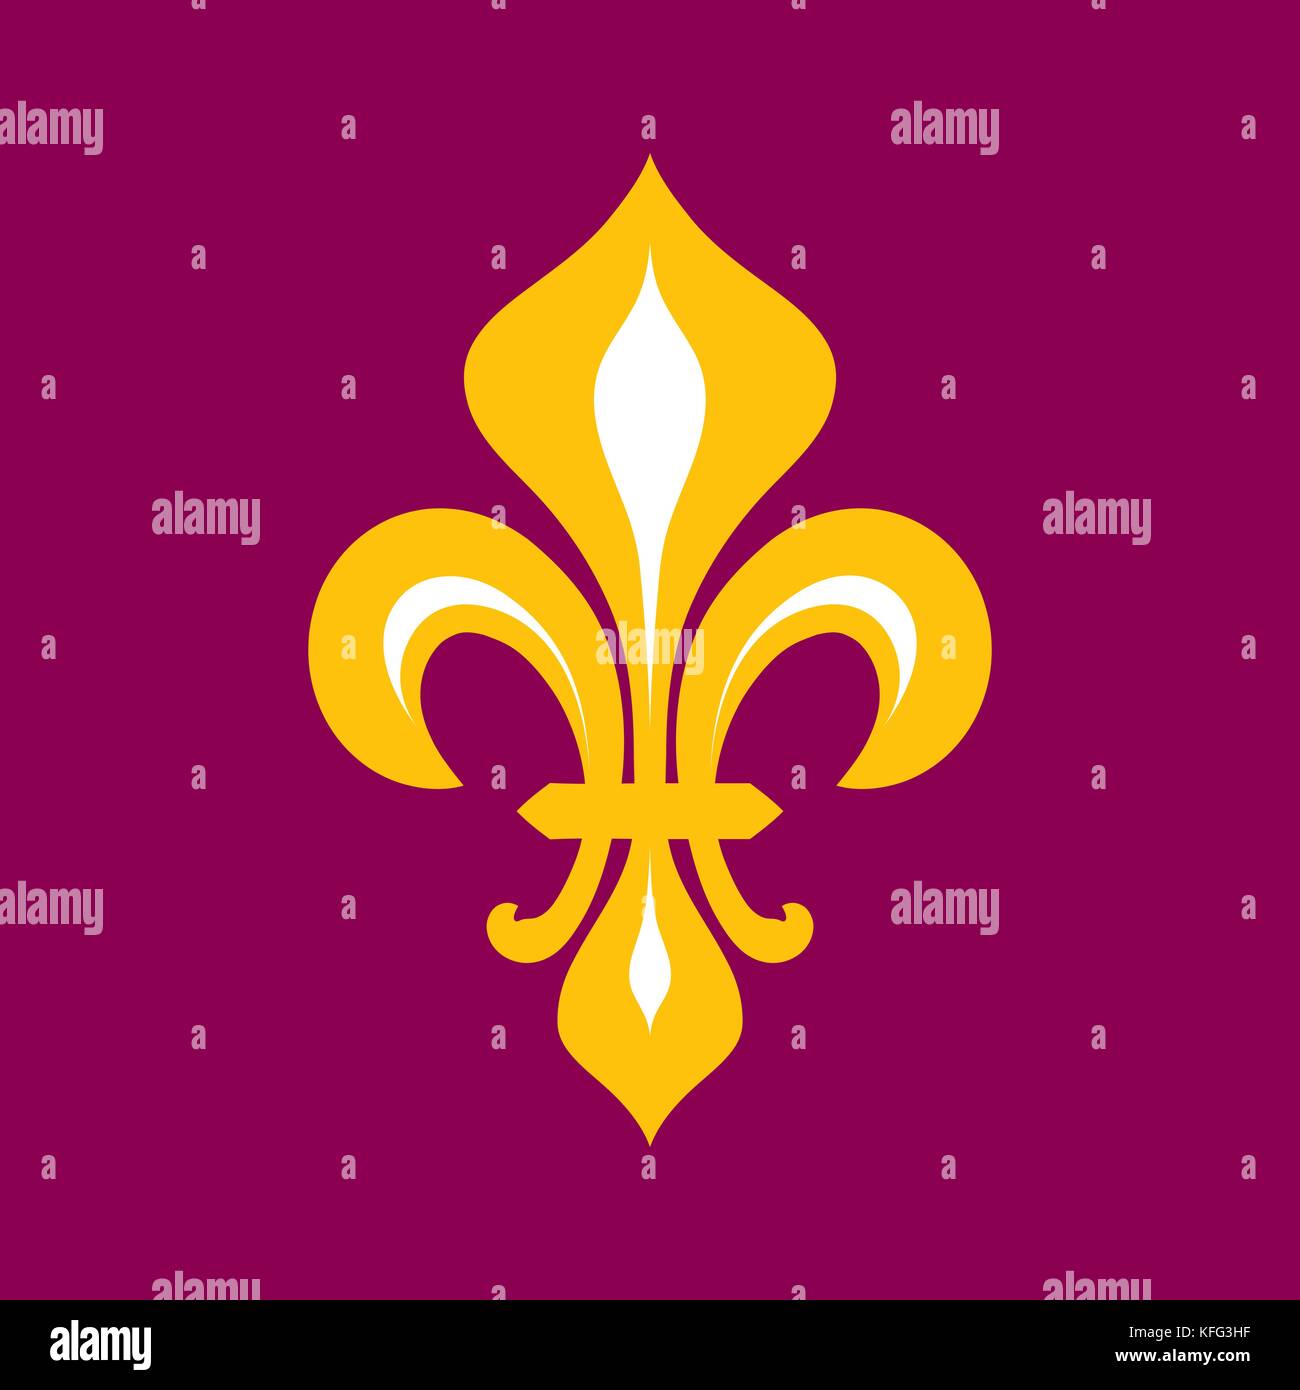 Fleur De Lis or fluer de lys flower lily royal medieval heraldic symbol  tattoo drawing. With individual PNG, jpeg, EPS and SVG files